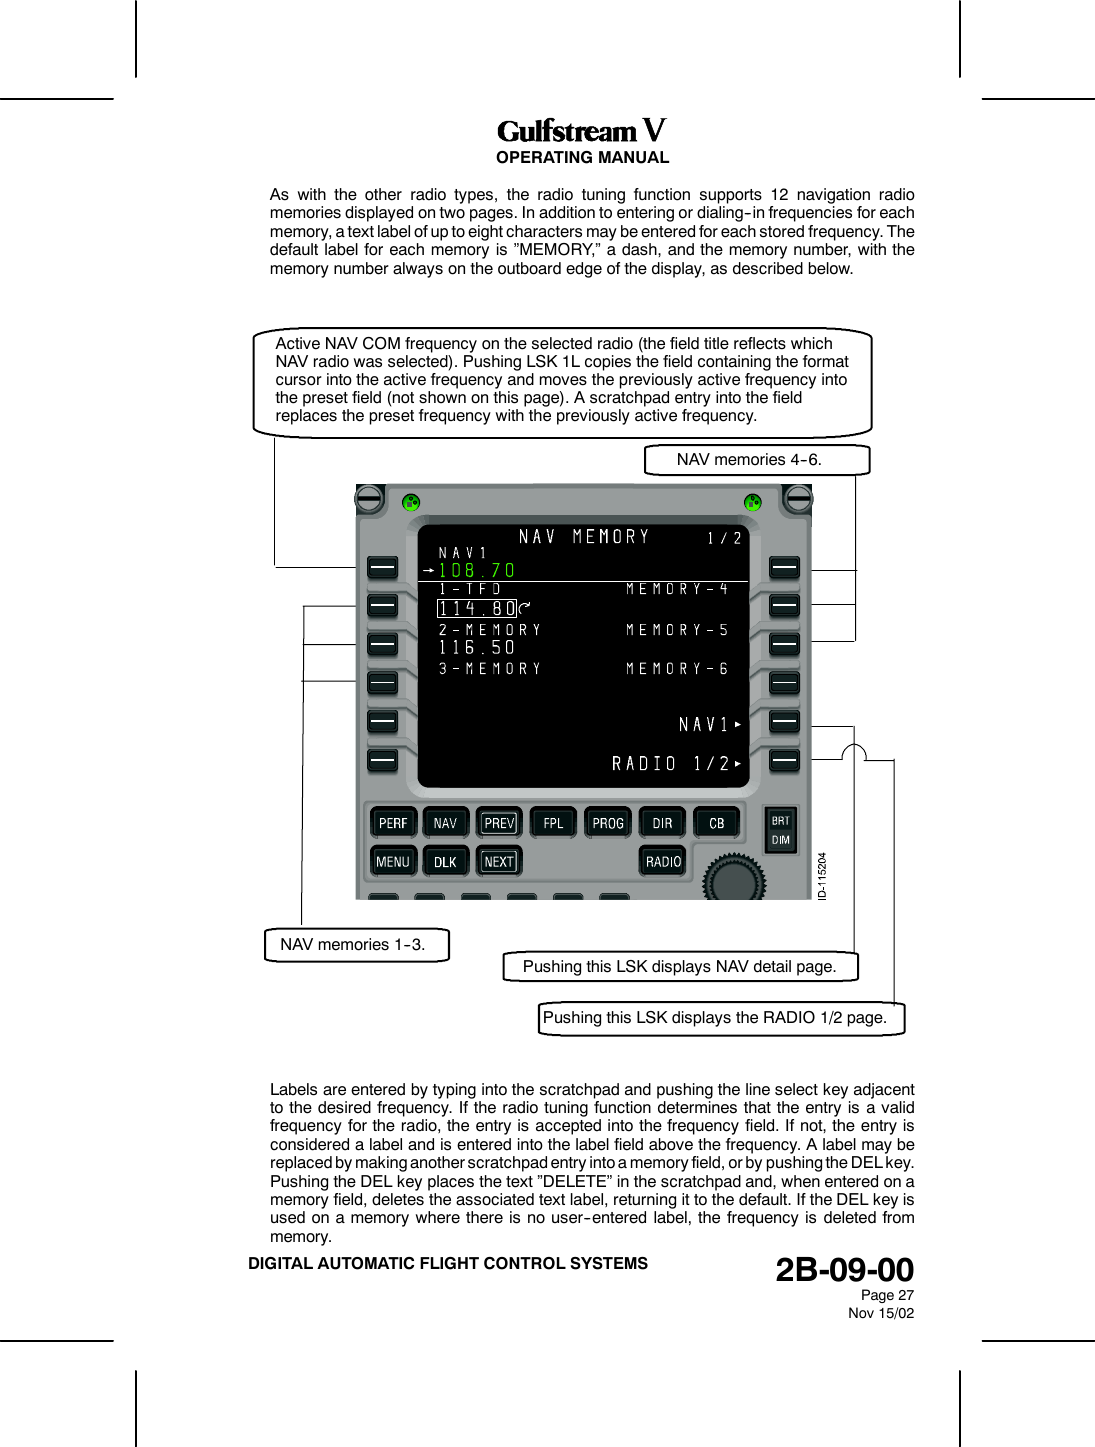 OPERATING MANUAL2B-09-00Page 27Nov 15/02DIGITAL AUTOMATIC FLIGHT CONTROL SYSTEMSAs with the other radio types, the radio tuning function supports 12 navigation radiomemories displayed on two pages. In addition to entering or dialing--in frequencies for eachmemory, a text label of up to eight characters may be entered for each stored frequency. Thedefault label for each memory is ”MEMORY,” a dash, and the memory number, with thememory number always on the outboard edge of the display, as described below.Active NAV COM frequency on the selected radio (the field title reflects whichNAV radio was selected). Pushing LSK 1L copies the field containing the formatcursor into the active frequency and moves the previously active frequency intothe preset field (not shown on this page). A scratchpad entry into the fieldreplaces the preset frequency with the previously active frequency.NAV memories 1--3.NAV memories 4--6.Pushing this LSK displays NAV detail page.Pushing this LSK displays the RADIO 1/2 page.Labels are entered by typing into the scratchpad and pushing the line select key adjacentto the desired frequency. If the radio tuning function determines that the entry is a validfrequency for the radio, the entry is accepted into the frequency field. If not, the entry isconsidered a label and is entered into the label field above the frequency. A label may bereplaced by making another scratchpad entry into a memory field, or by pushing the DEL key.Pushing the DEL key places the text ”DELETE” in the scratchpad and, when entered on amemory field, deletes the associated text label, returning it to the default. If the DEL key isused on a memory where there is no user--entered label, the frequency is deleted frommemory.